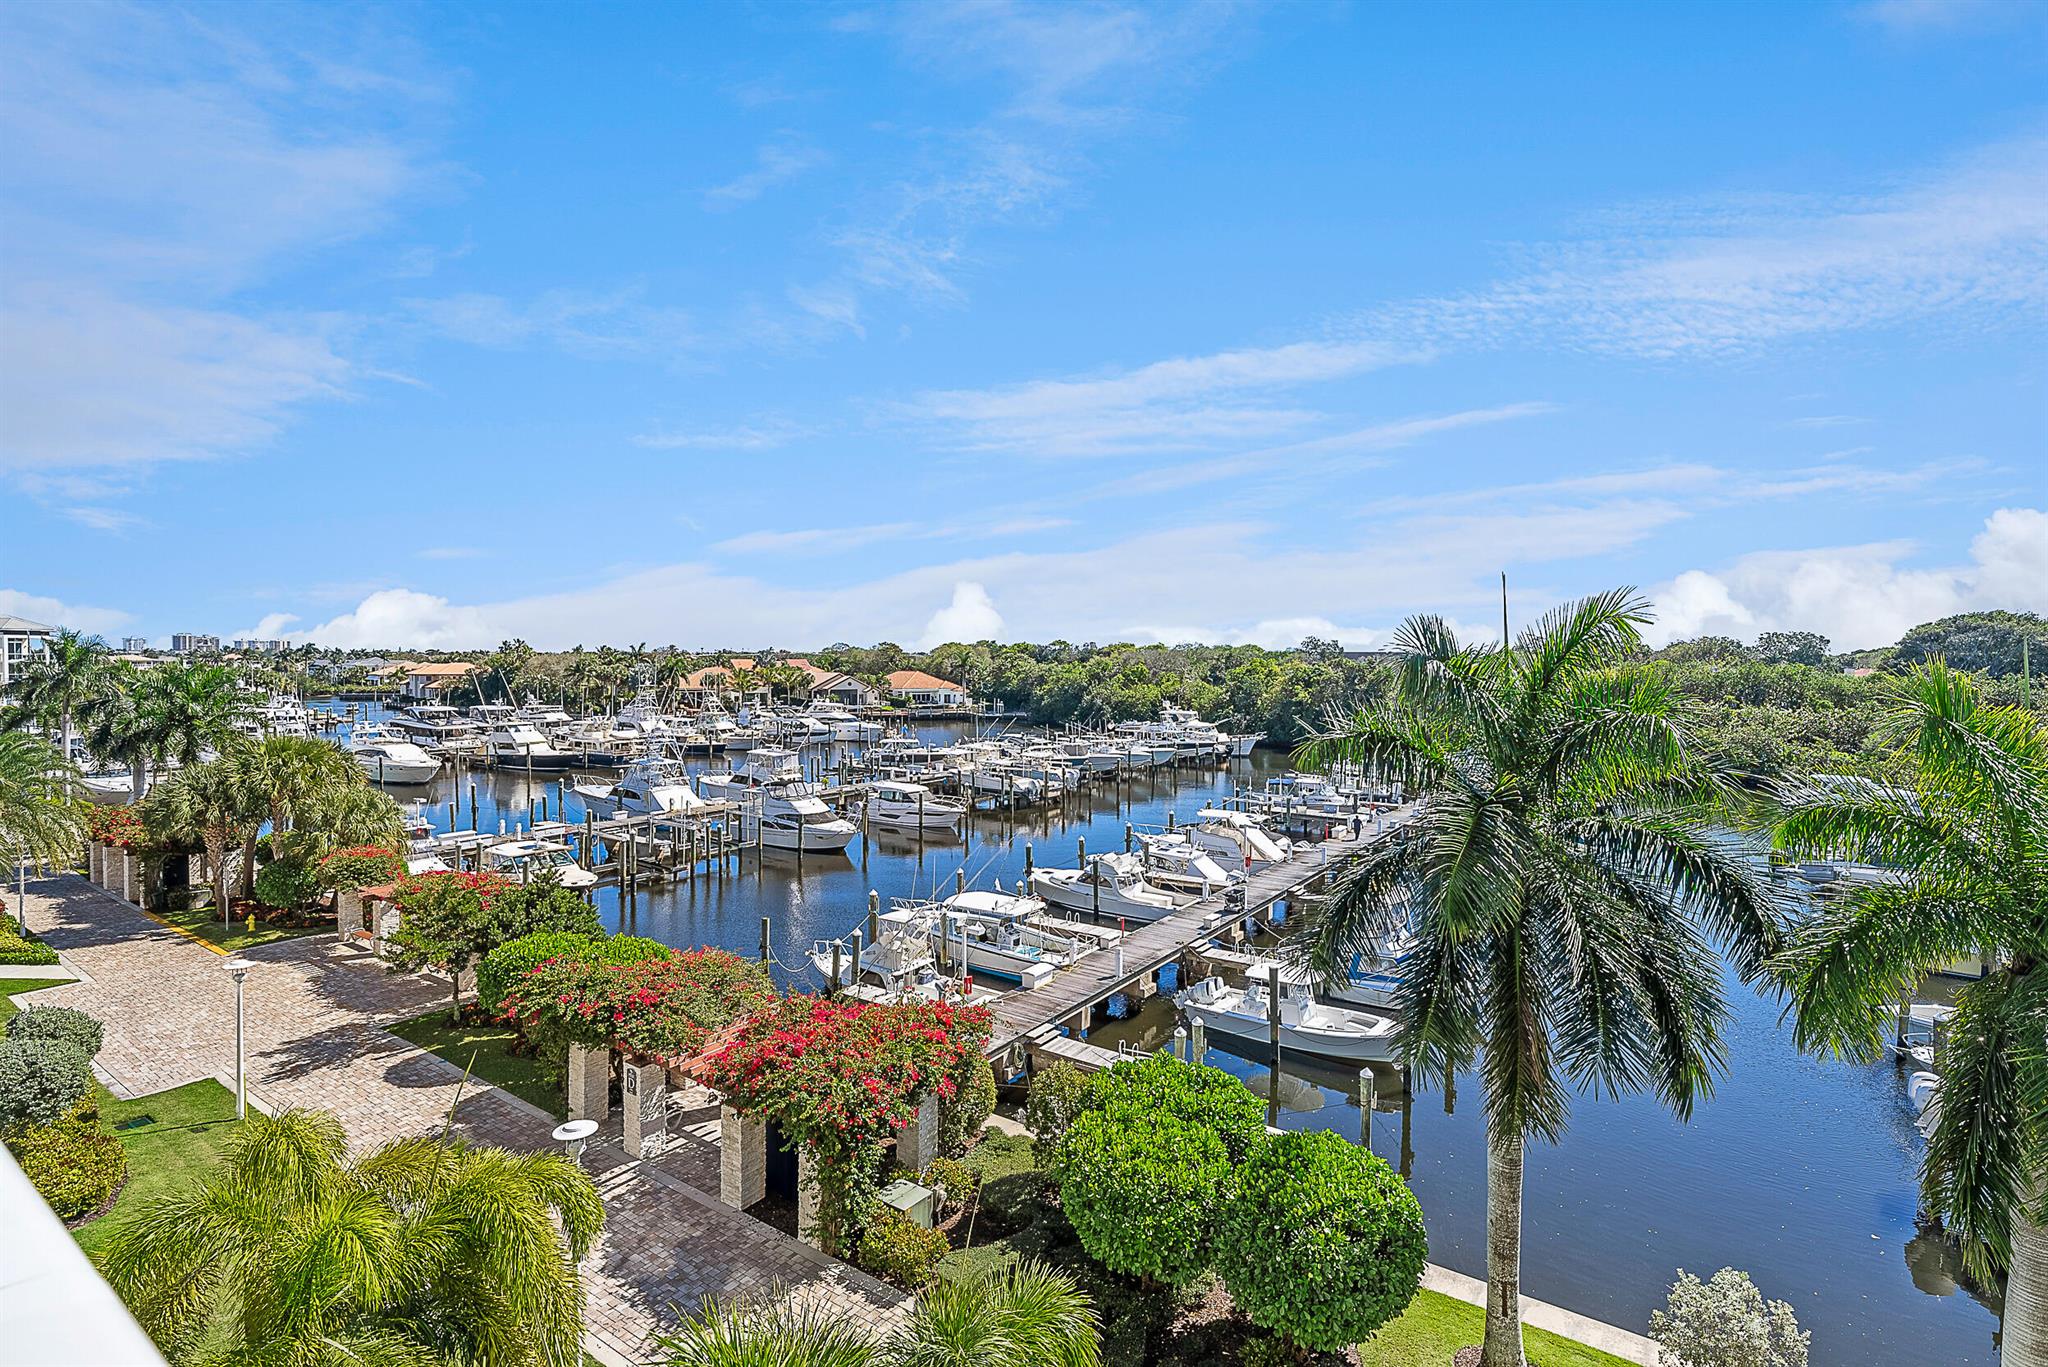 Direct marina views rarely available! Enjoy relaxing sunrises & sunsets with marina views just moments from the Intracoastal & blue water beaches of Juno Beach. Coupled with the state-of-the-art concierge services you'll understand the allure of the Azure. Relish in this elegantly furnished home (some exclusions). Step from your privately keyed elevator to an open floor plan with plenty of natural light. Custom built-in family room feature wall, & an office that can double as a 3rd bedroom. 24/7 manned gate, full-service hurricane safe marina with dockage, fitness center, heated pool/spa, lockers & sauna, private climate-controlled wine room, business center, club/card room, putting green & golf simulator, & indoor parking protects the finest of automobiles with 2 assigned parking spaces.